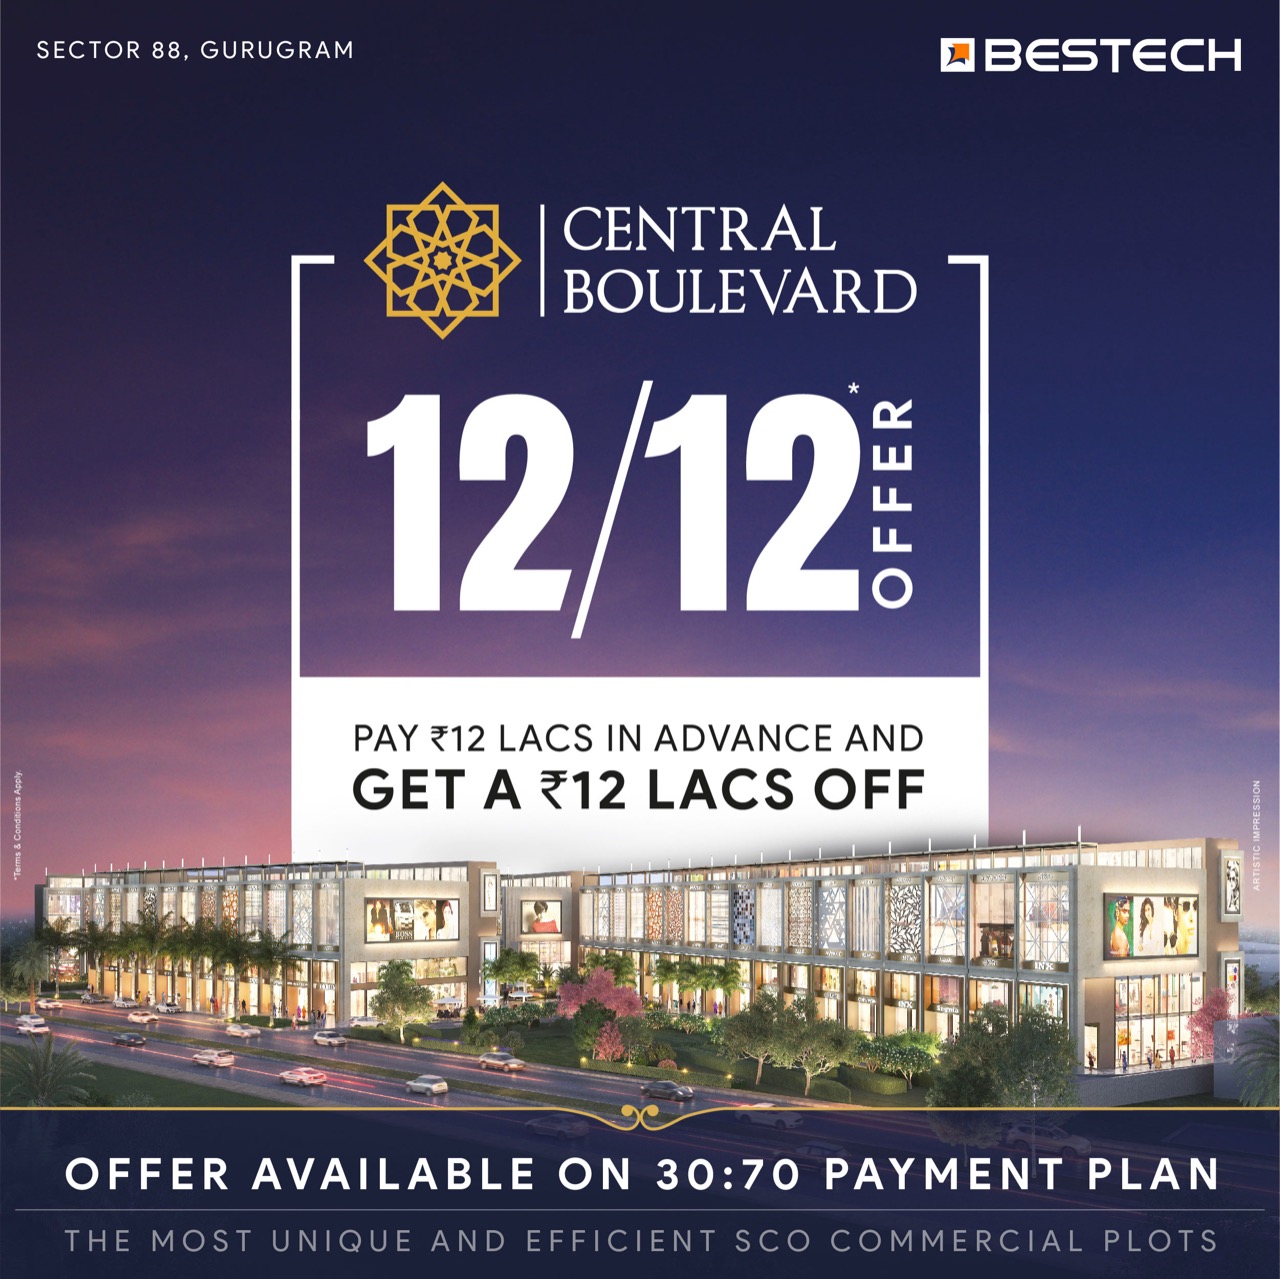 Offer available on 30:70 payment plan at Bestech Central Boulevard in Gurgaon Update